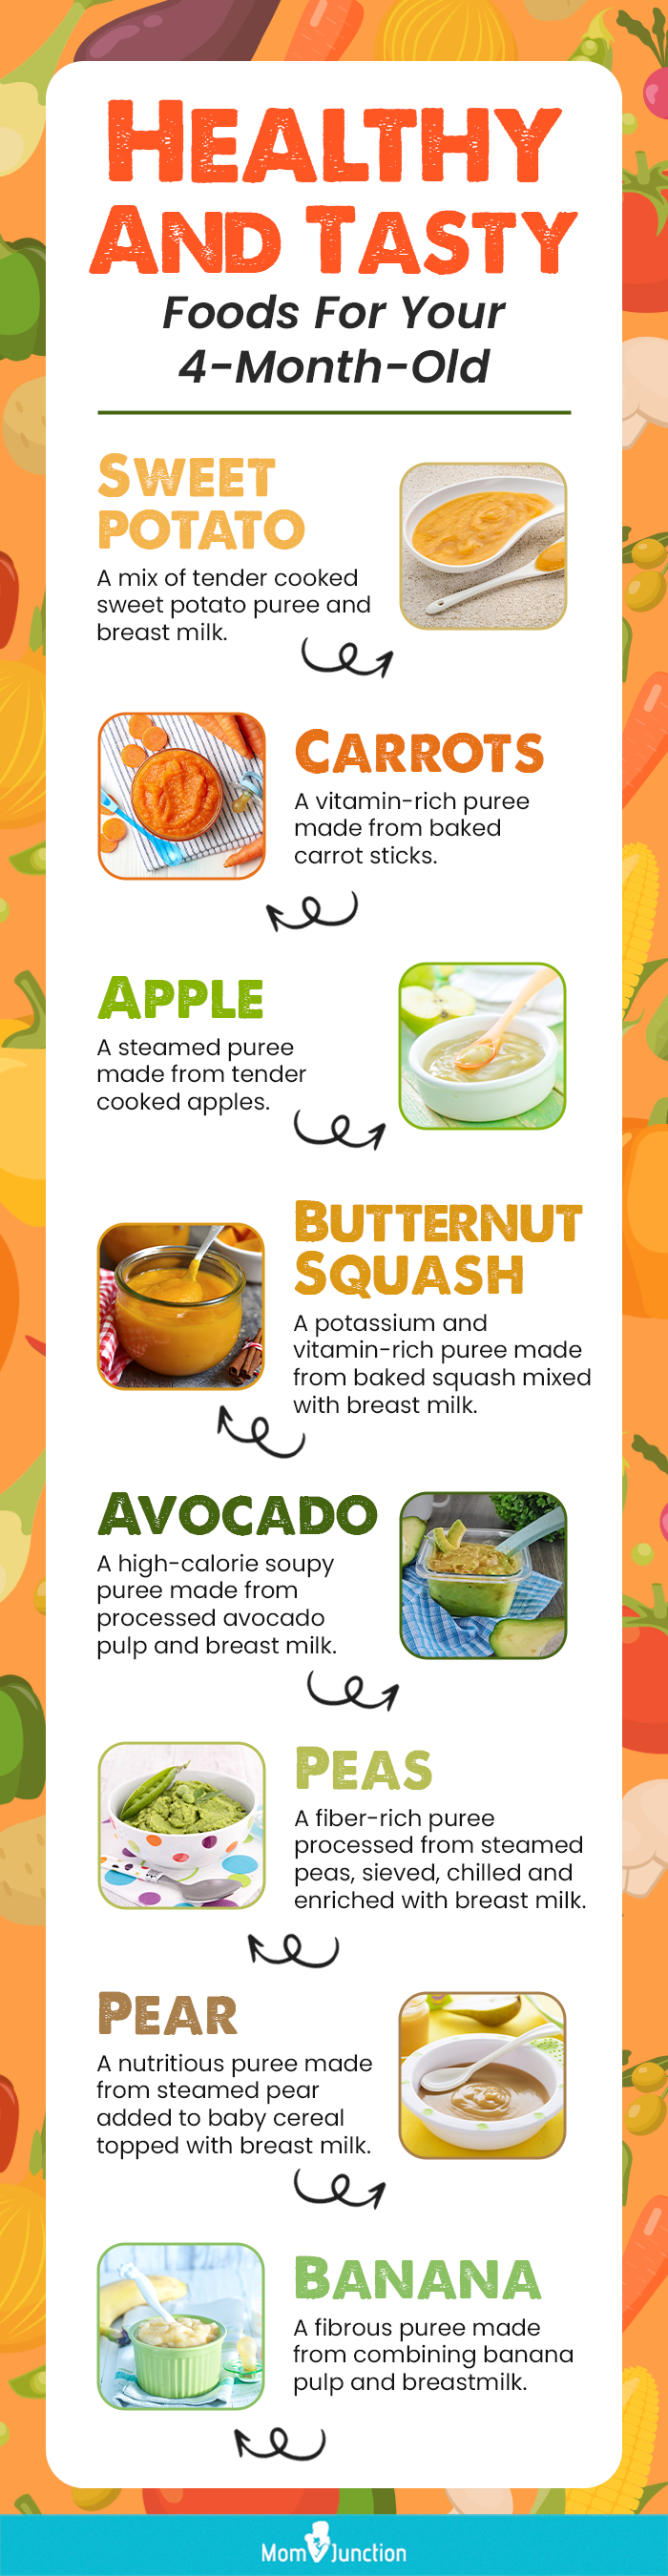 healthy and tasty foods for your 4 month old (infographic)